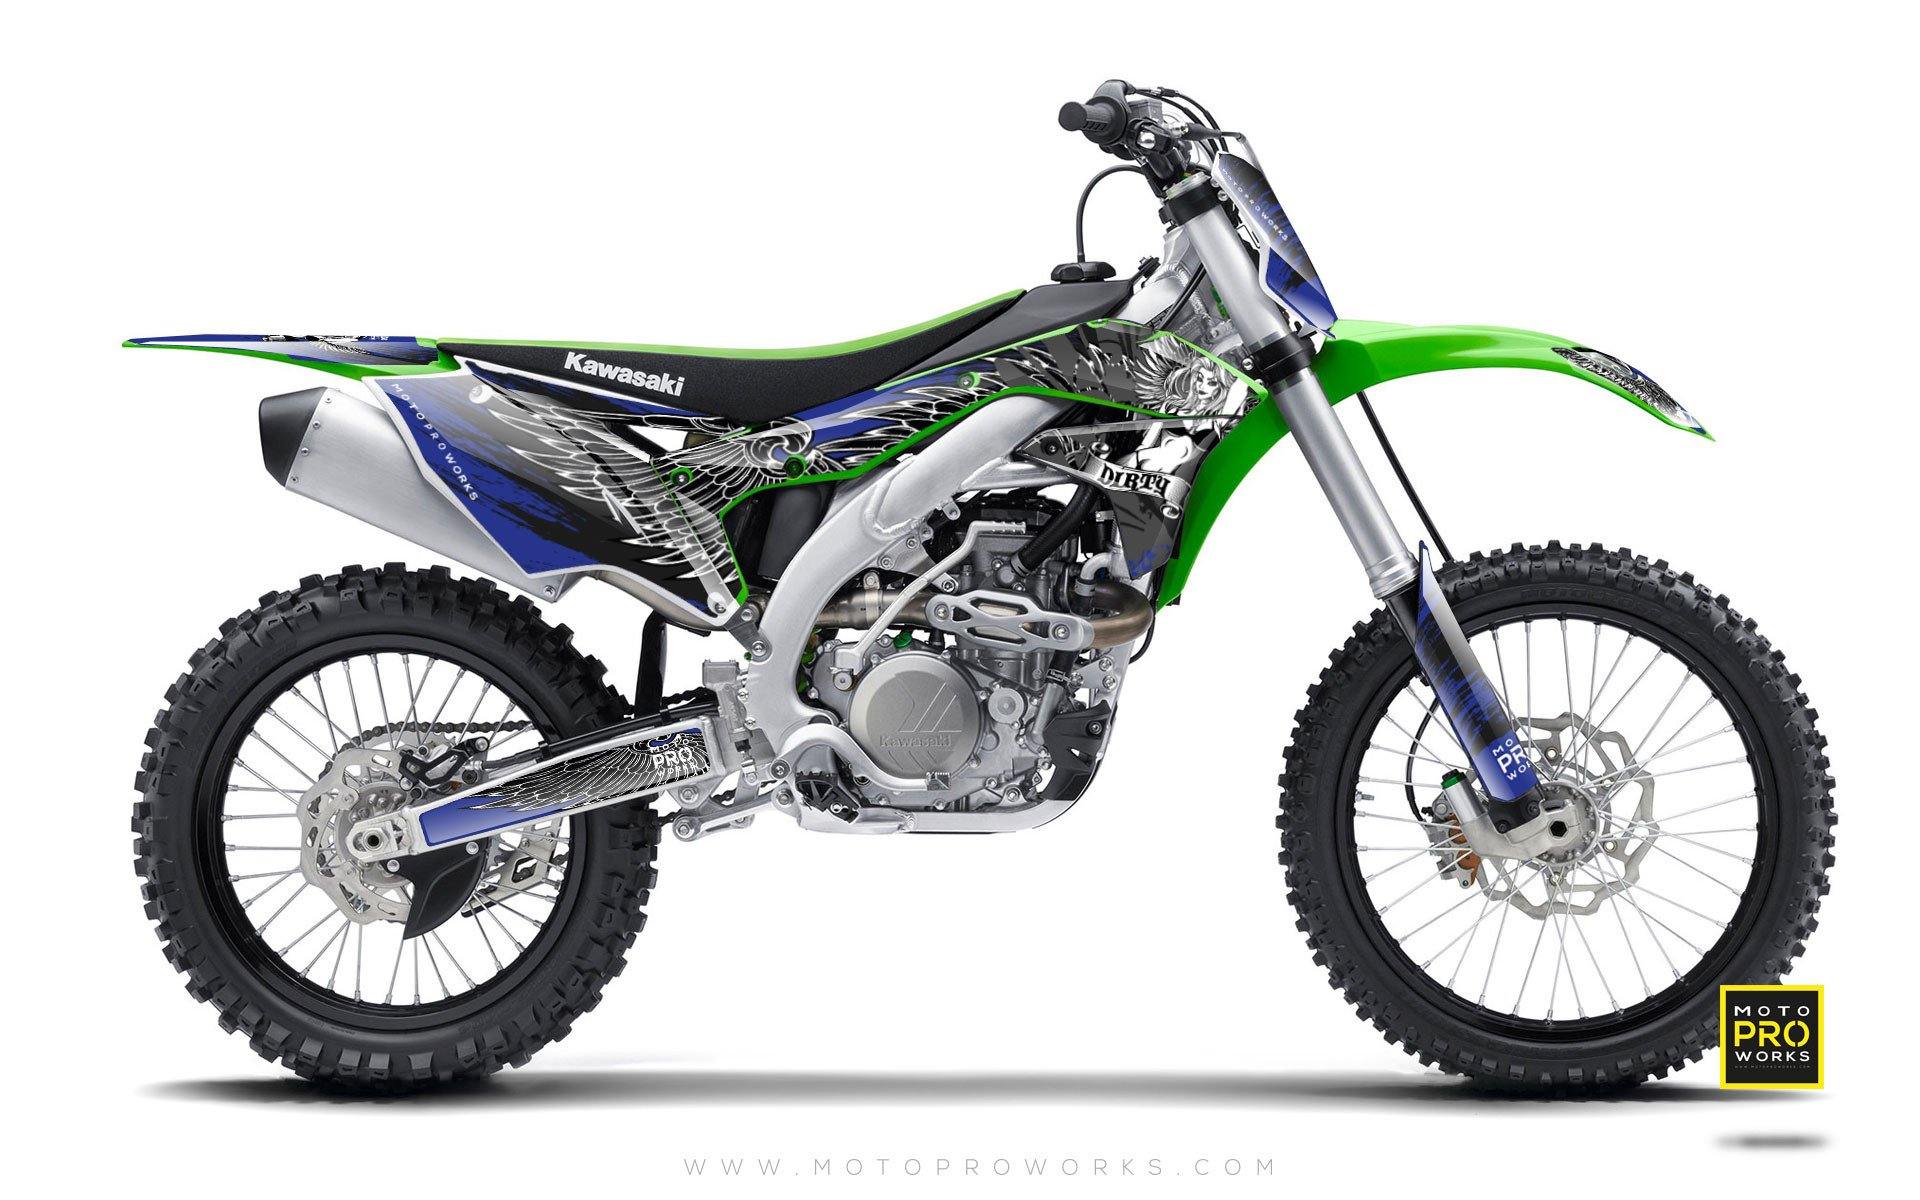 Kawasaki GRAPHIC KIT - "Dirty Angel" (blue) - MotoProWorks | Decals and Bike Graphic kit